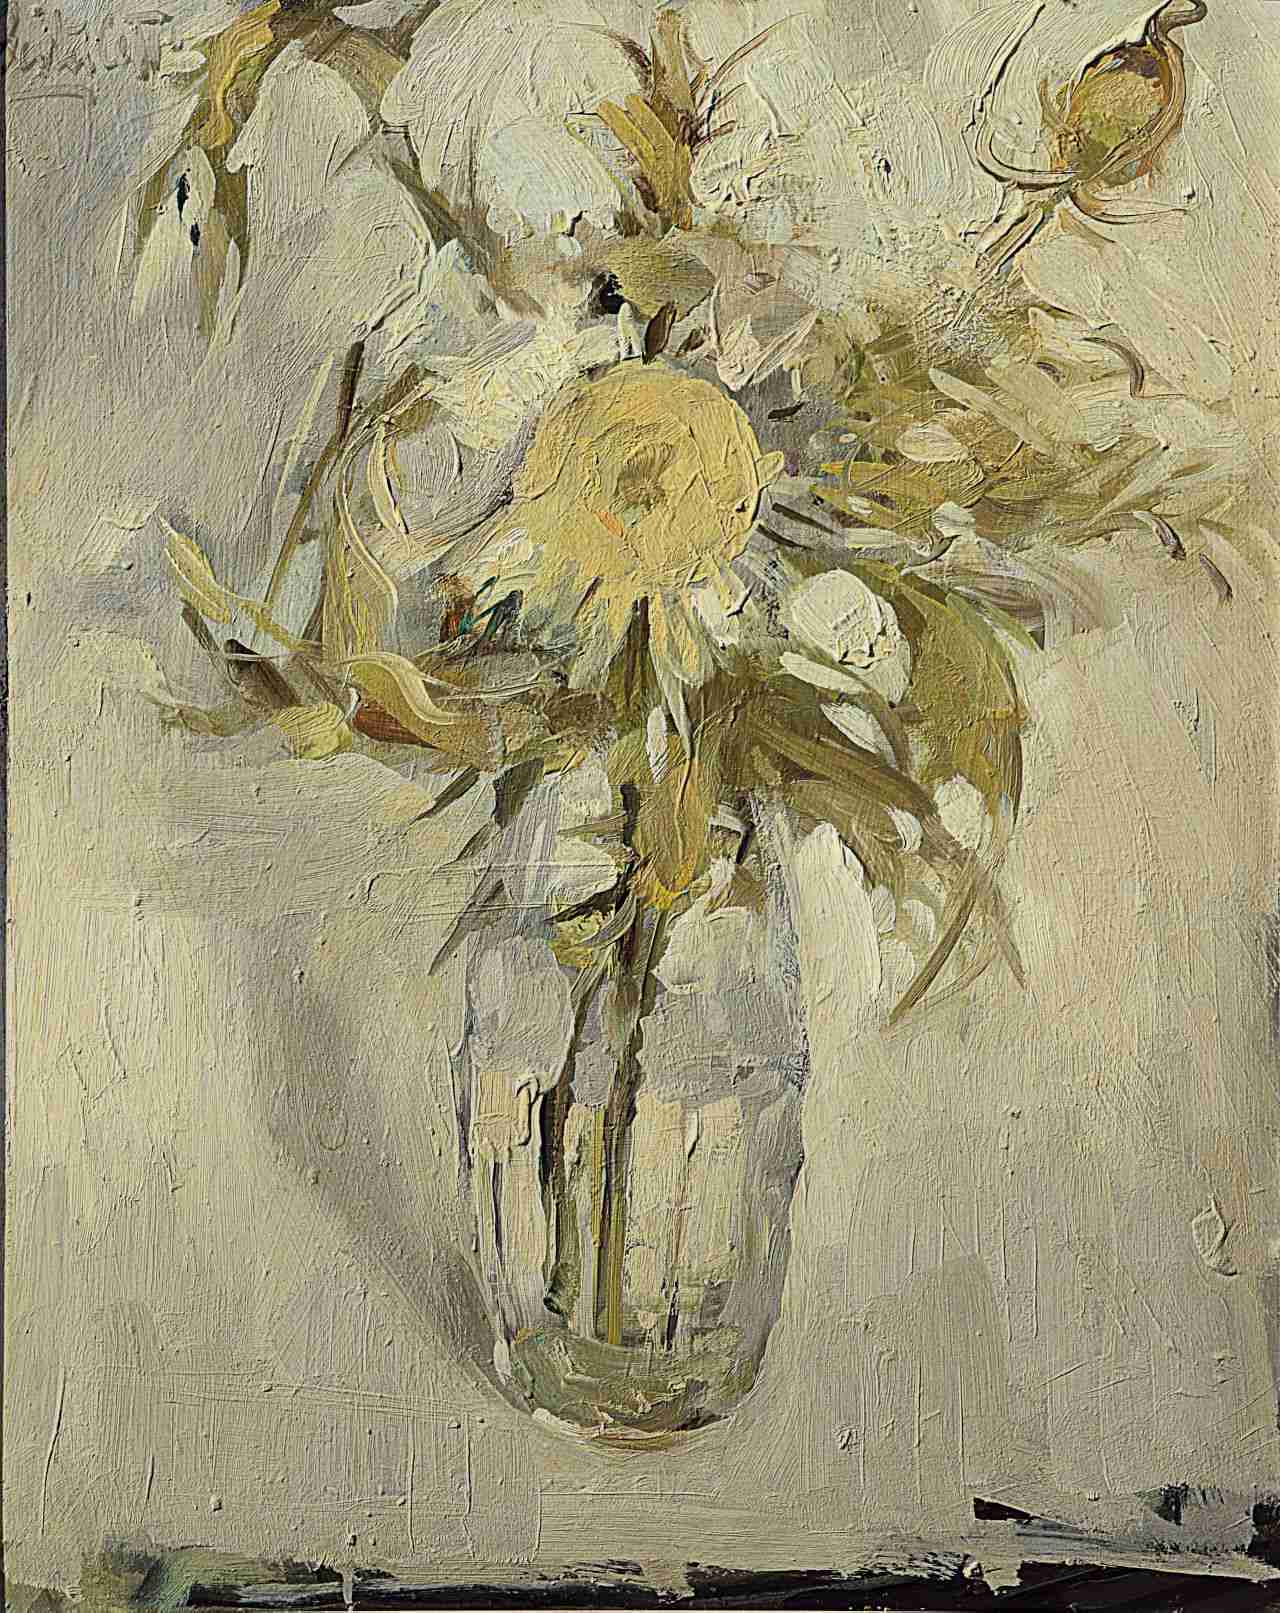 Thistles in a crystal vase 1983